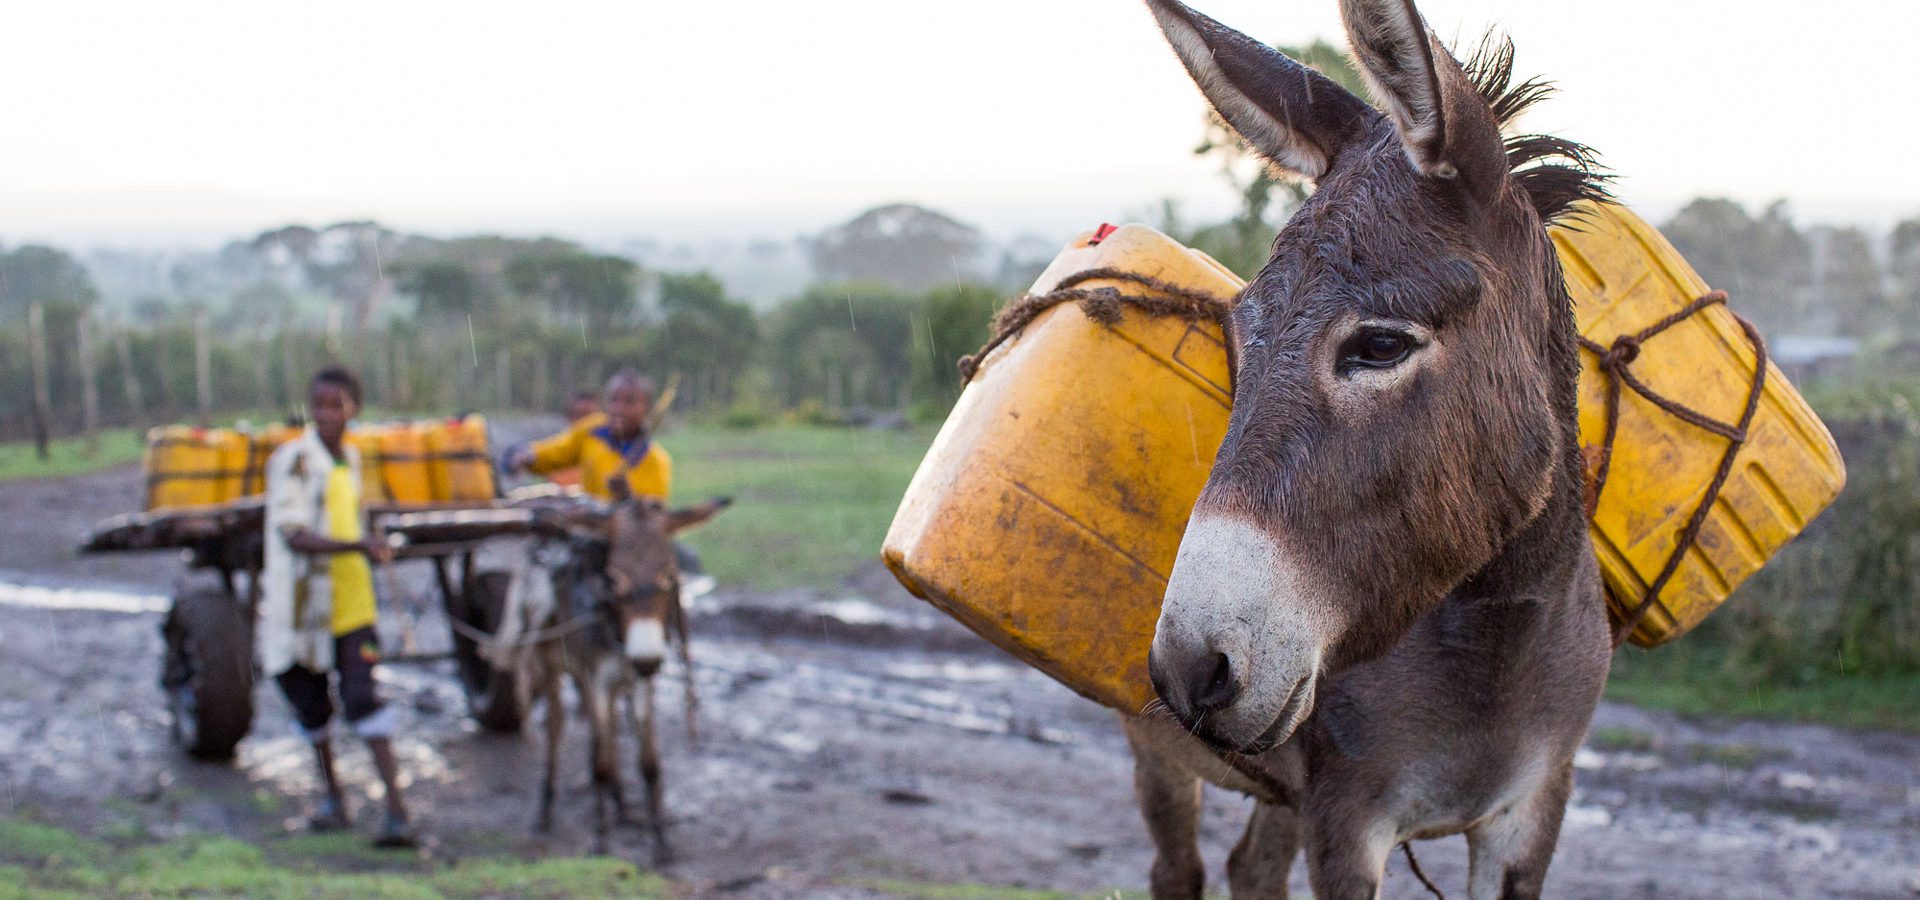 Donkey on the right hand side carrying 2 yellow water barrels.